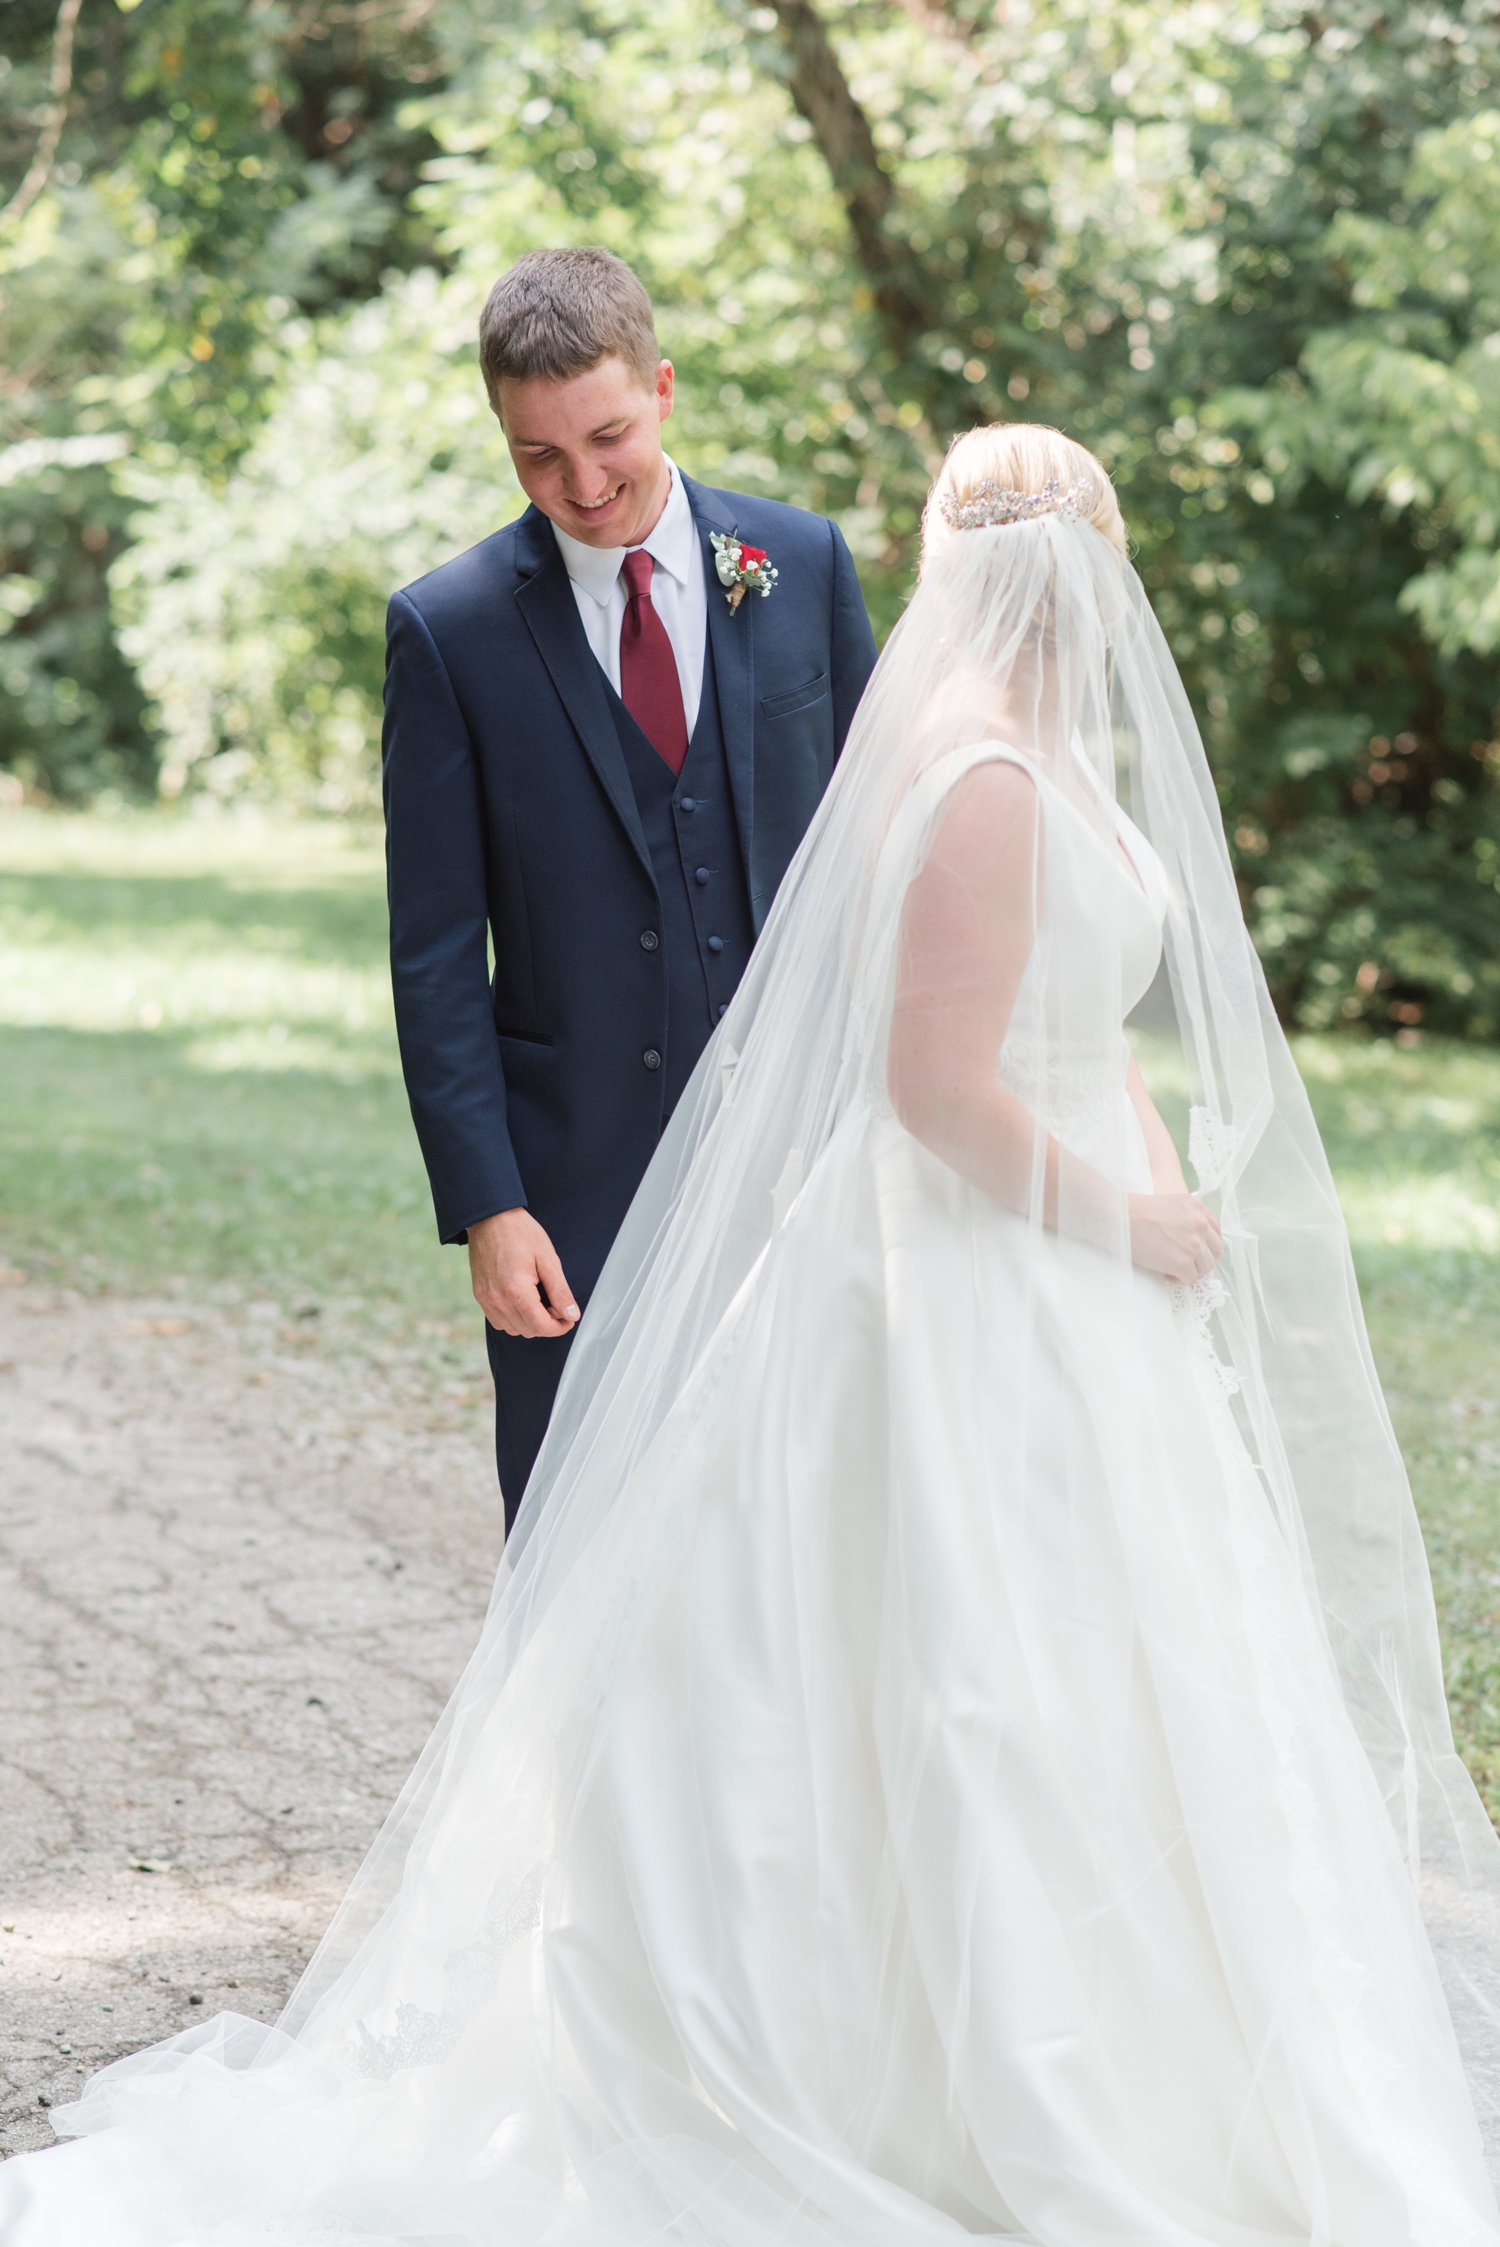 first look Indianapolis Indiana wedding by Courtney Rudicel wedding photographer in Indiana